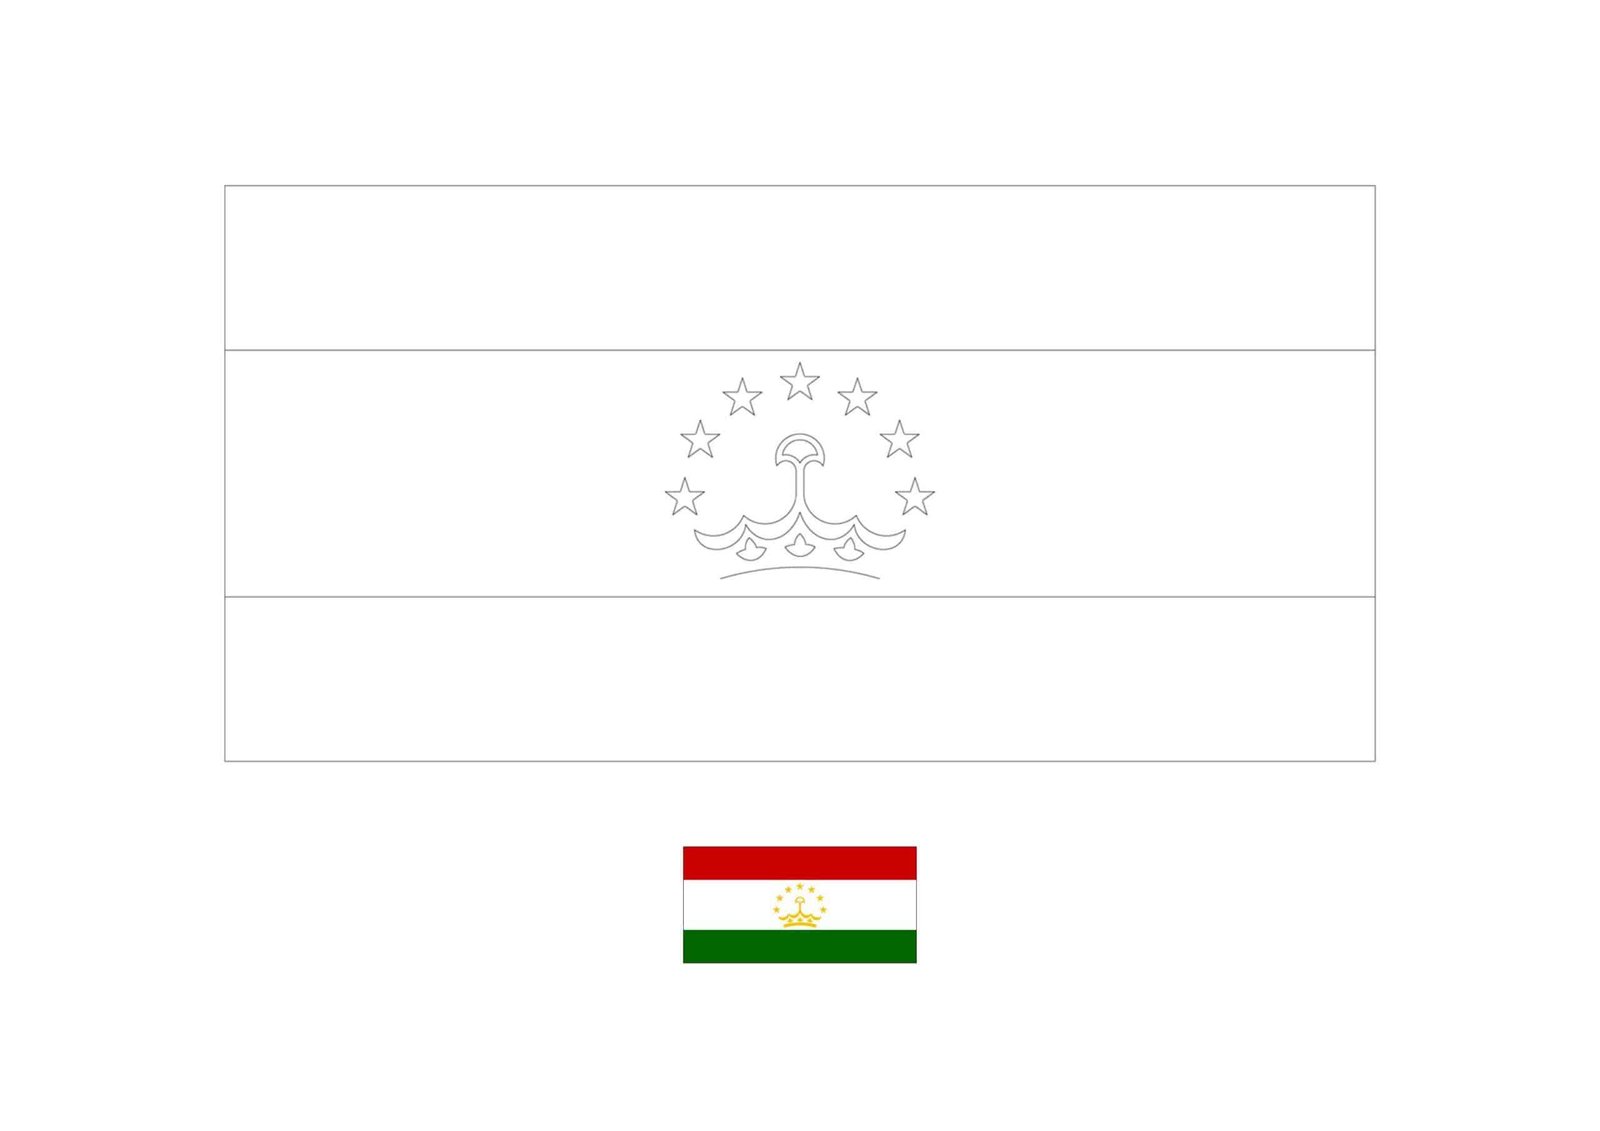 Tajikistan flag coloring page with a sample